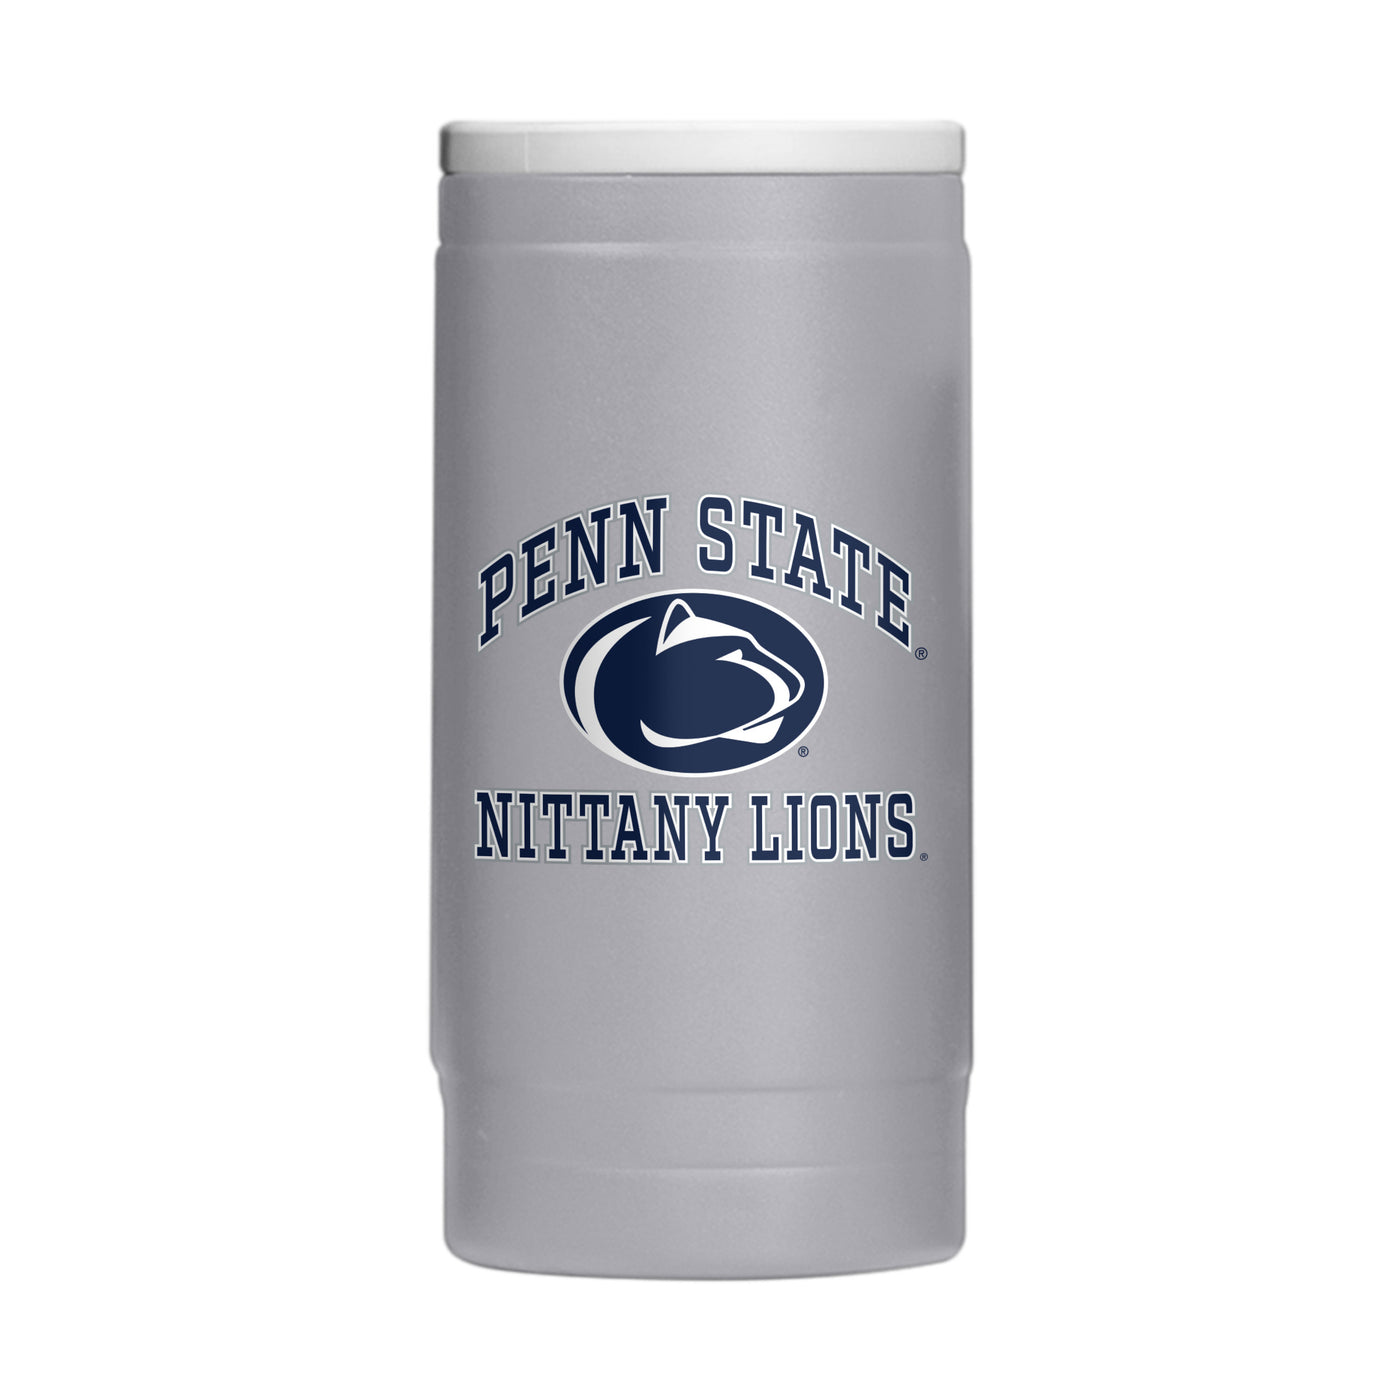 Penn State 12oz Athletic Powder Coat Slim Can Coolie